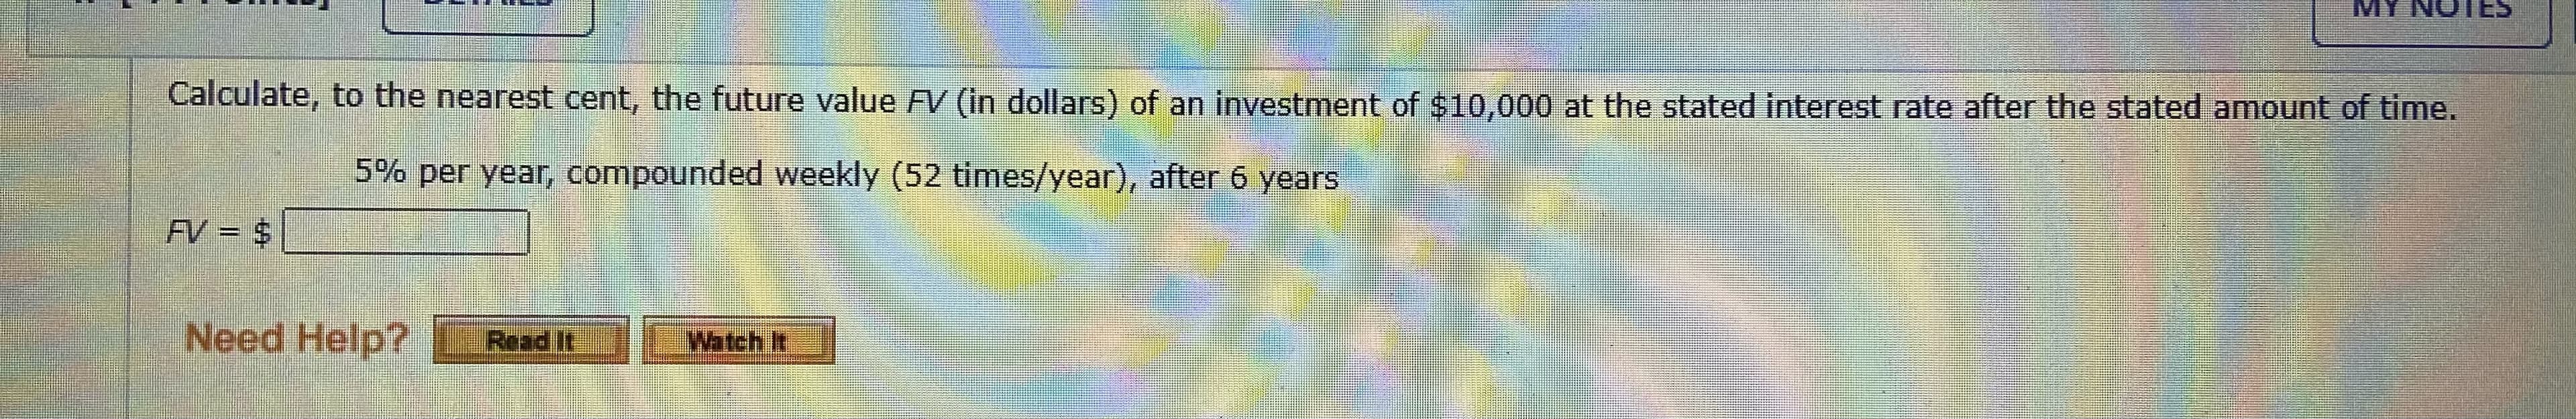 Calculate, to the nearest cent, the future value FV (in dollars) of an investment of $10,000 at the stated interest rate after the stated amount of time.
5% per year, compounded weekly (52 times/year), after 6 years
AV = $
